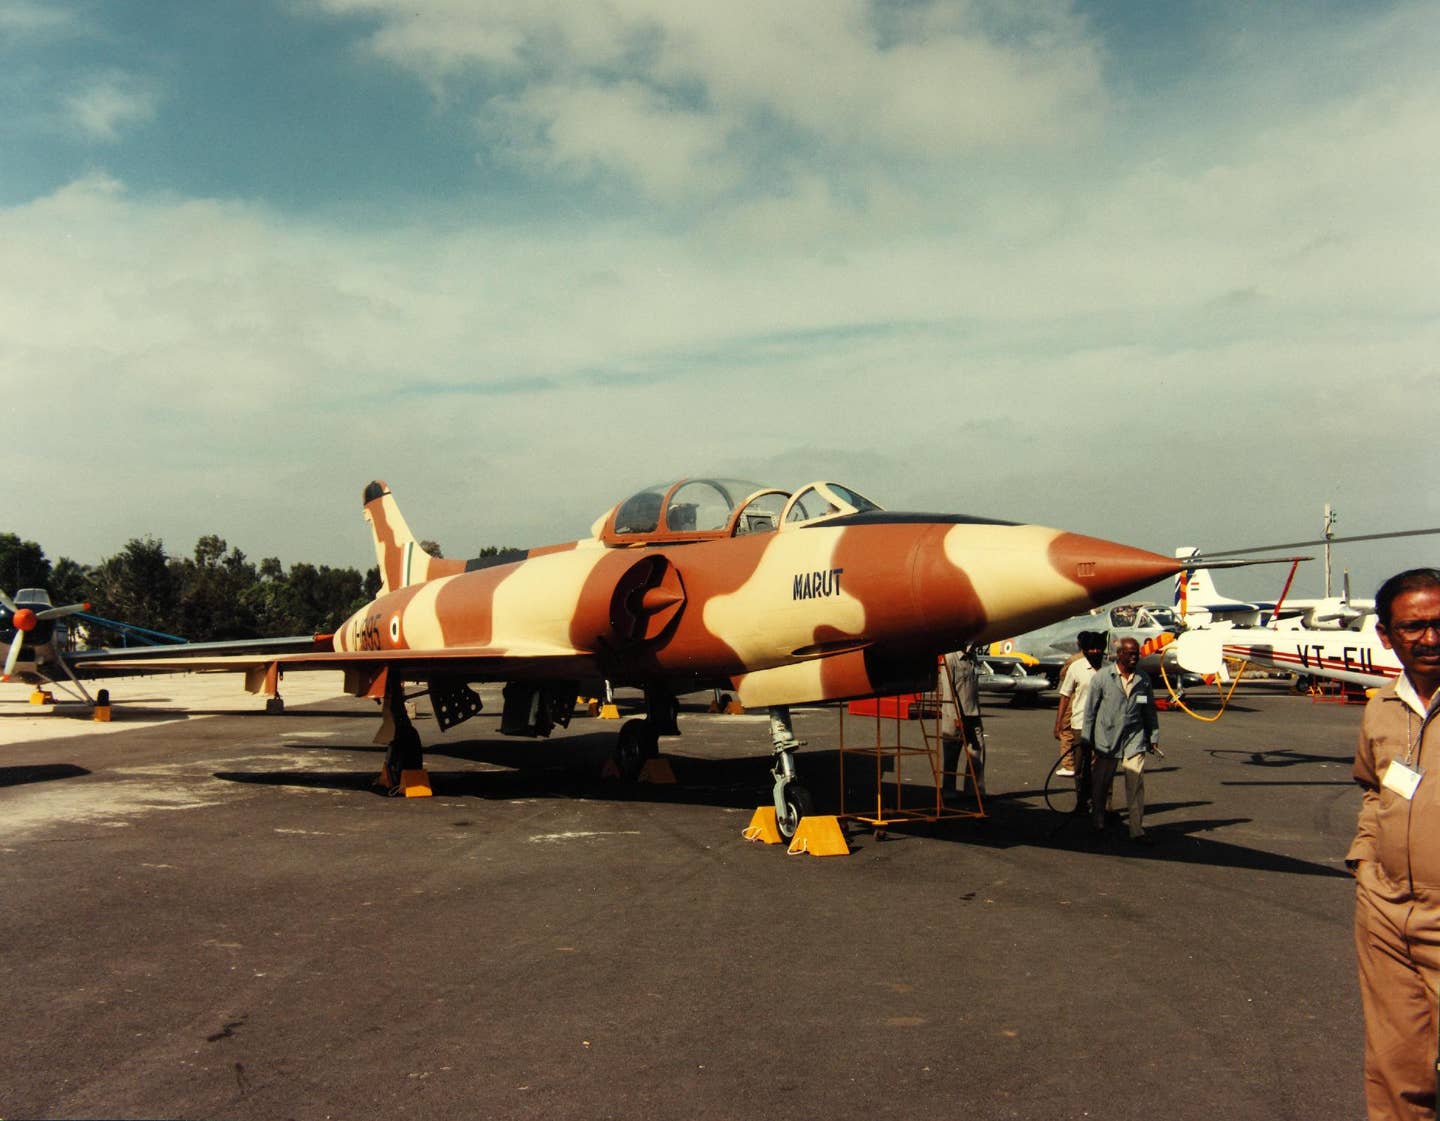 HAL Marut, a home-grown combat aircraft that served in the Indian Air Force. (Image from Wikimedia Commons)